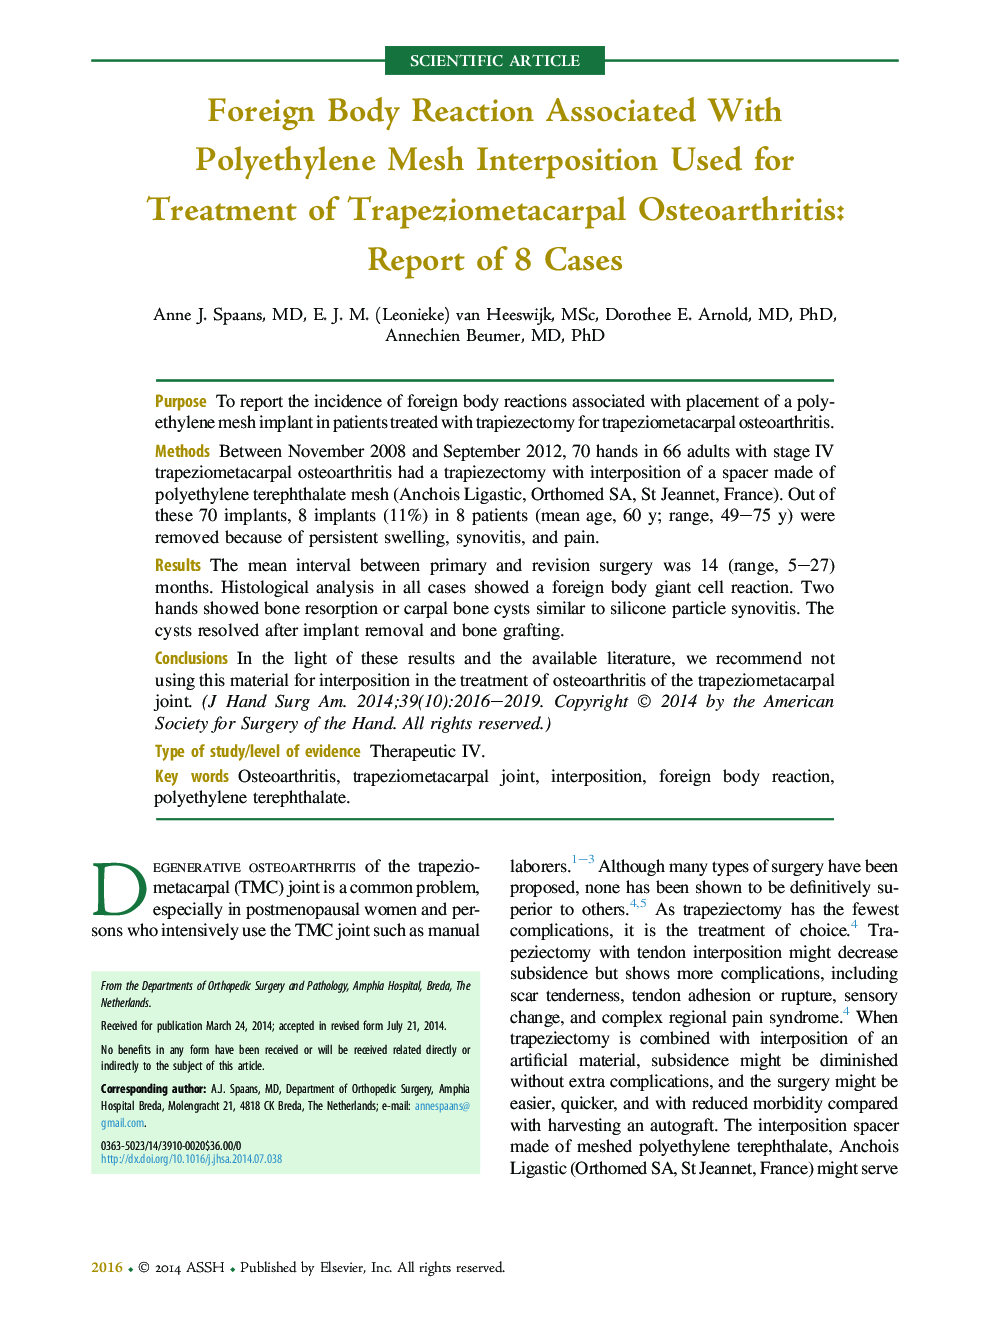 Foreign Body Reaction Associated With Polyethylene Mesh Interposition Used for Treatment of Trapeziometacarpal Osteoarthritis: Report of 8 Cases 